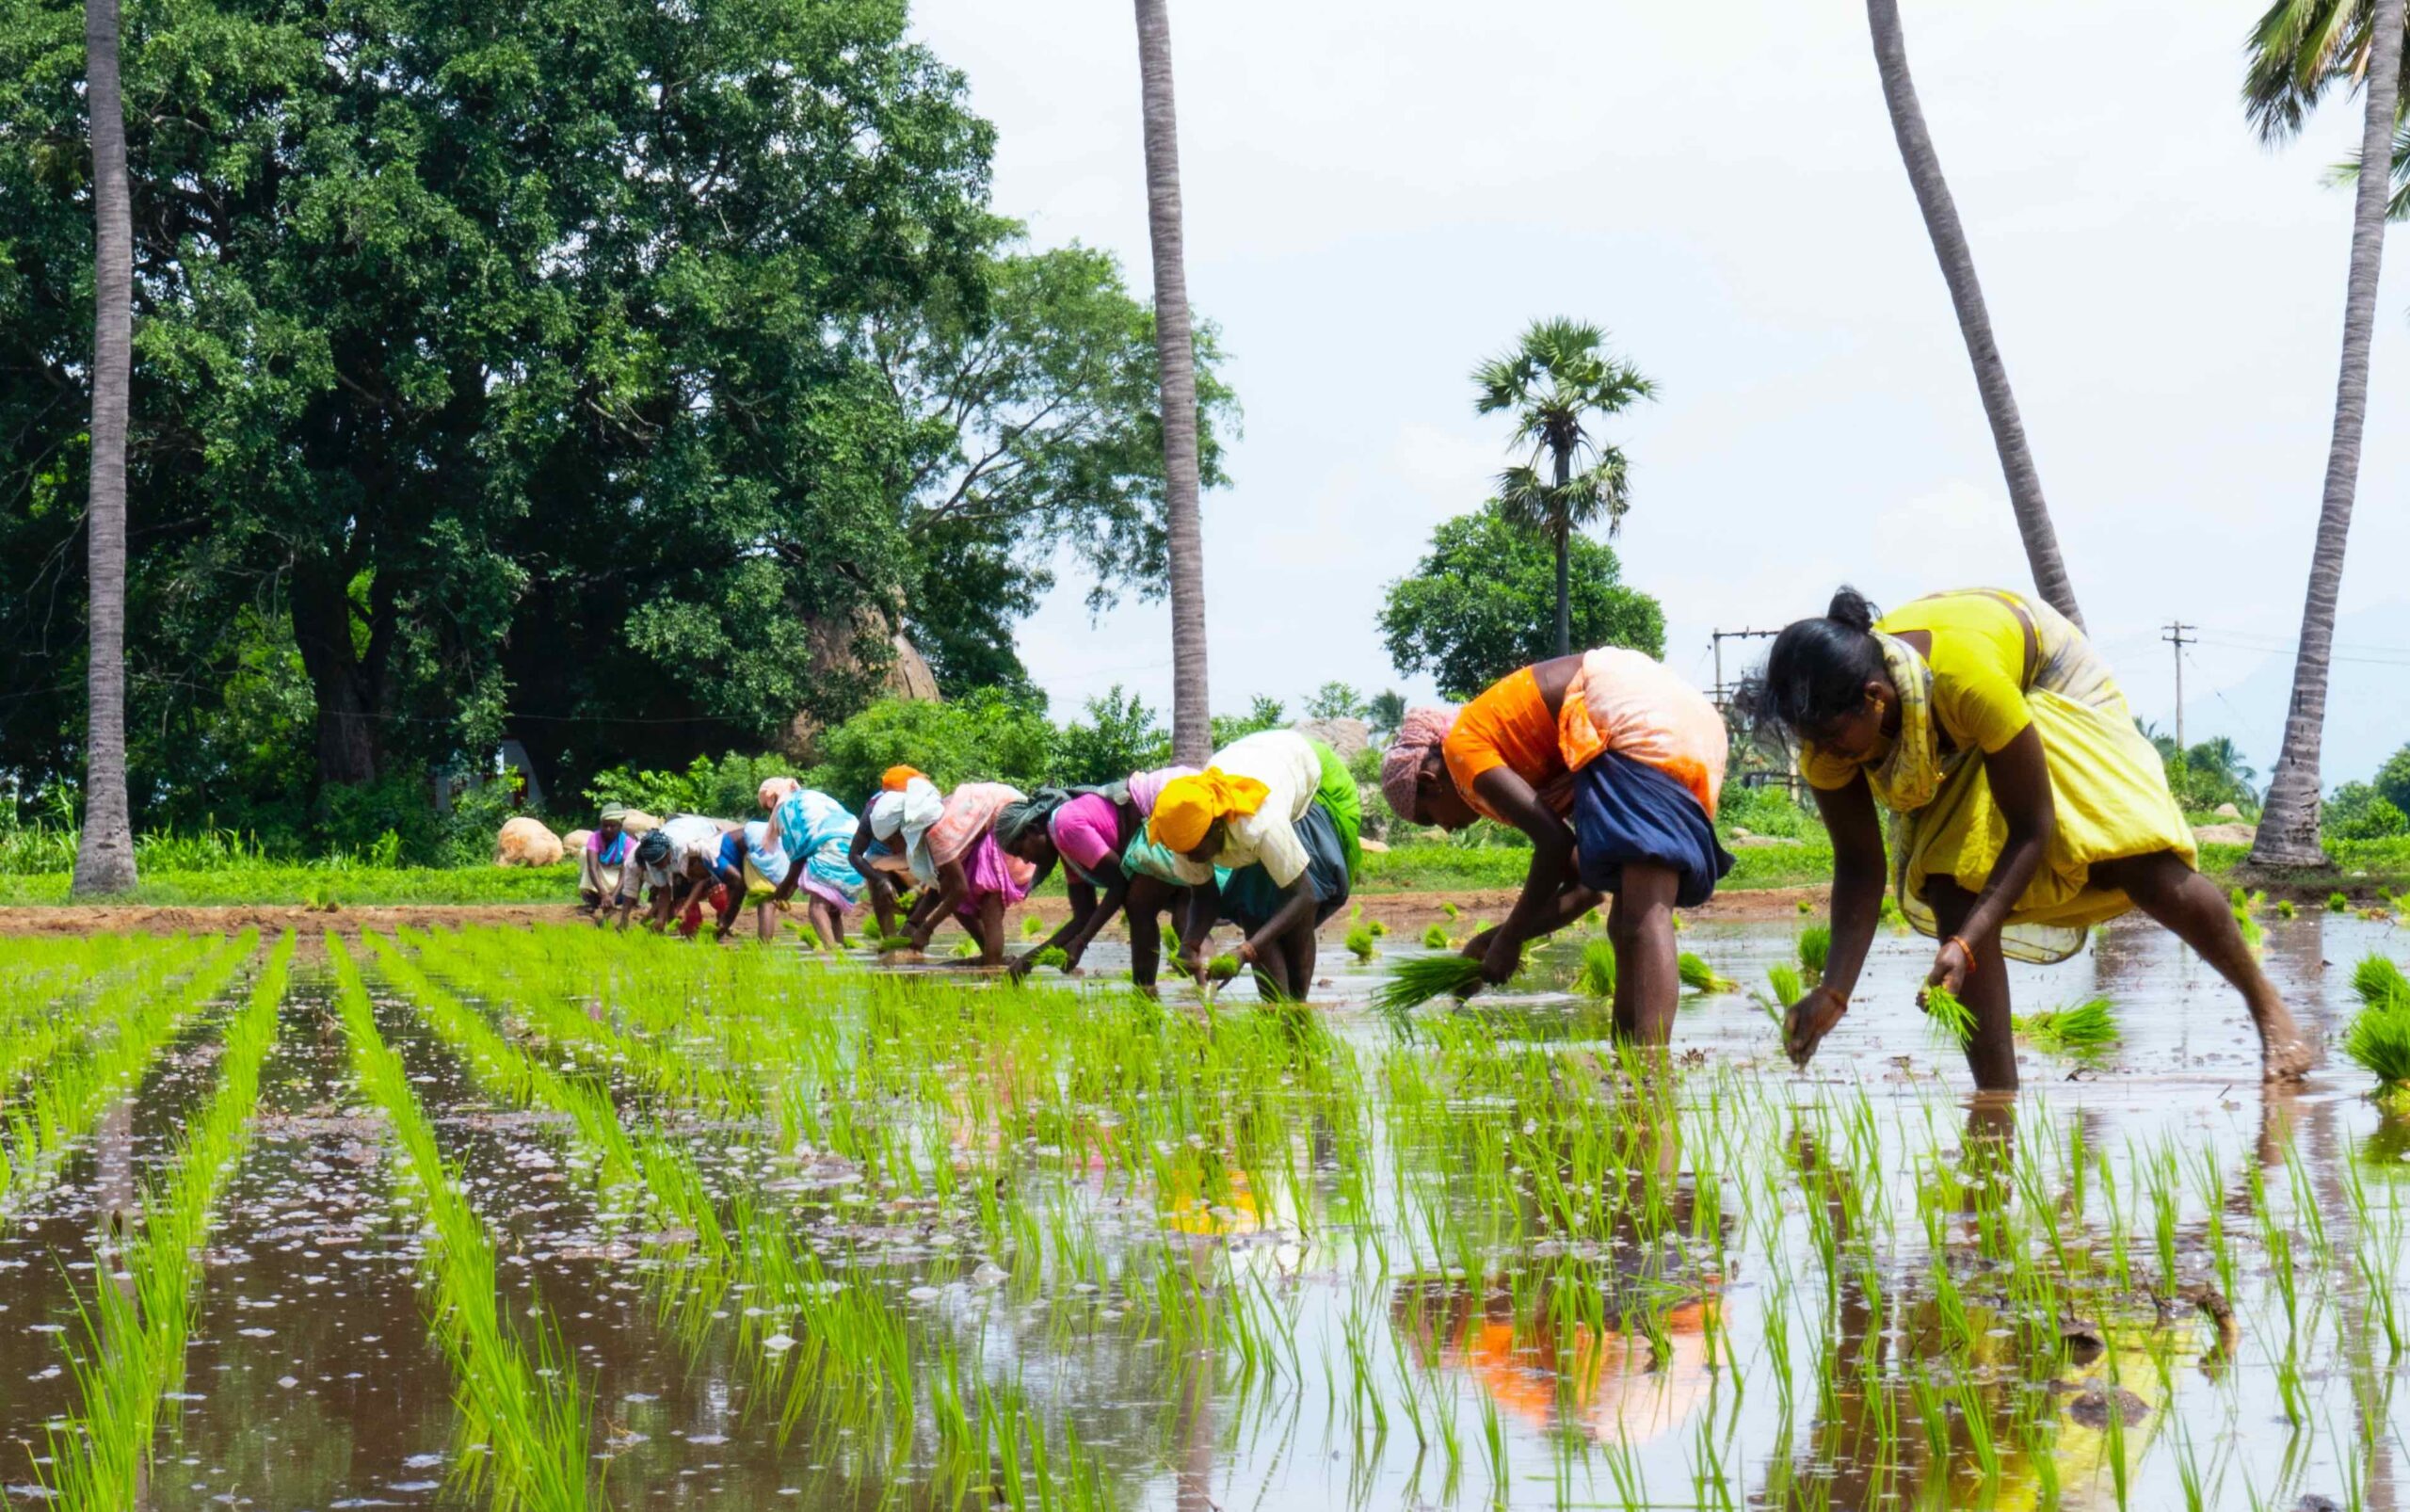 Women workers bent over in a line planting rice plants in paddy, trees in background